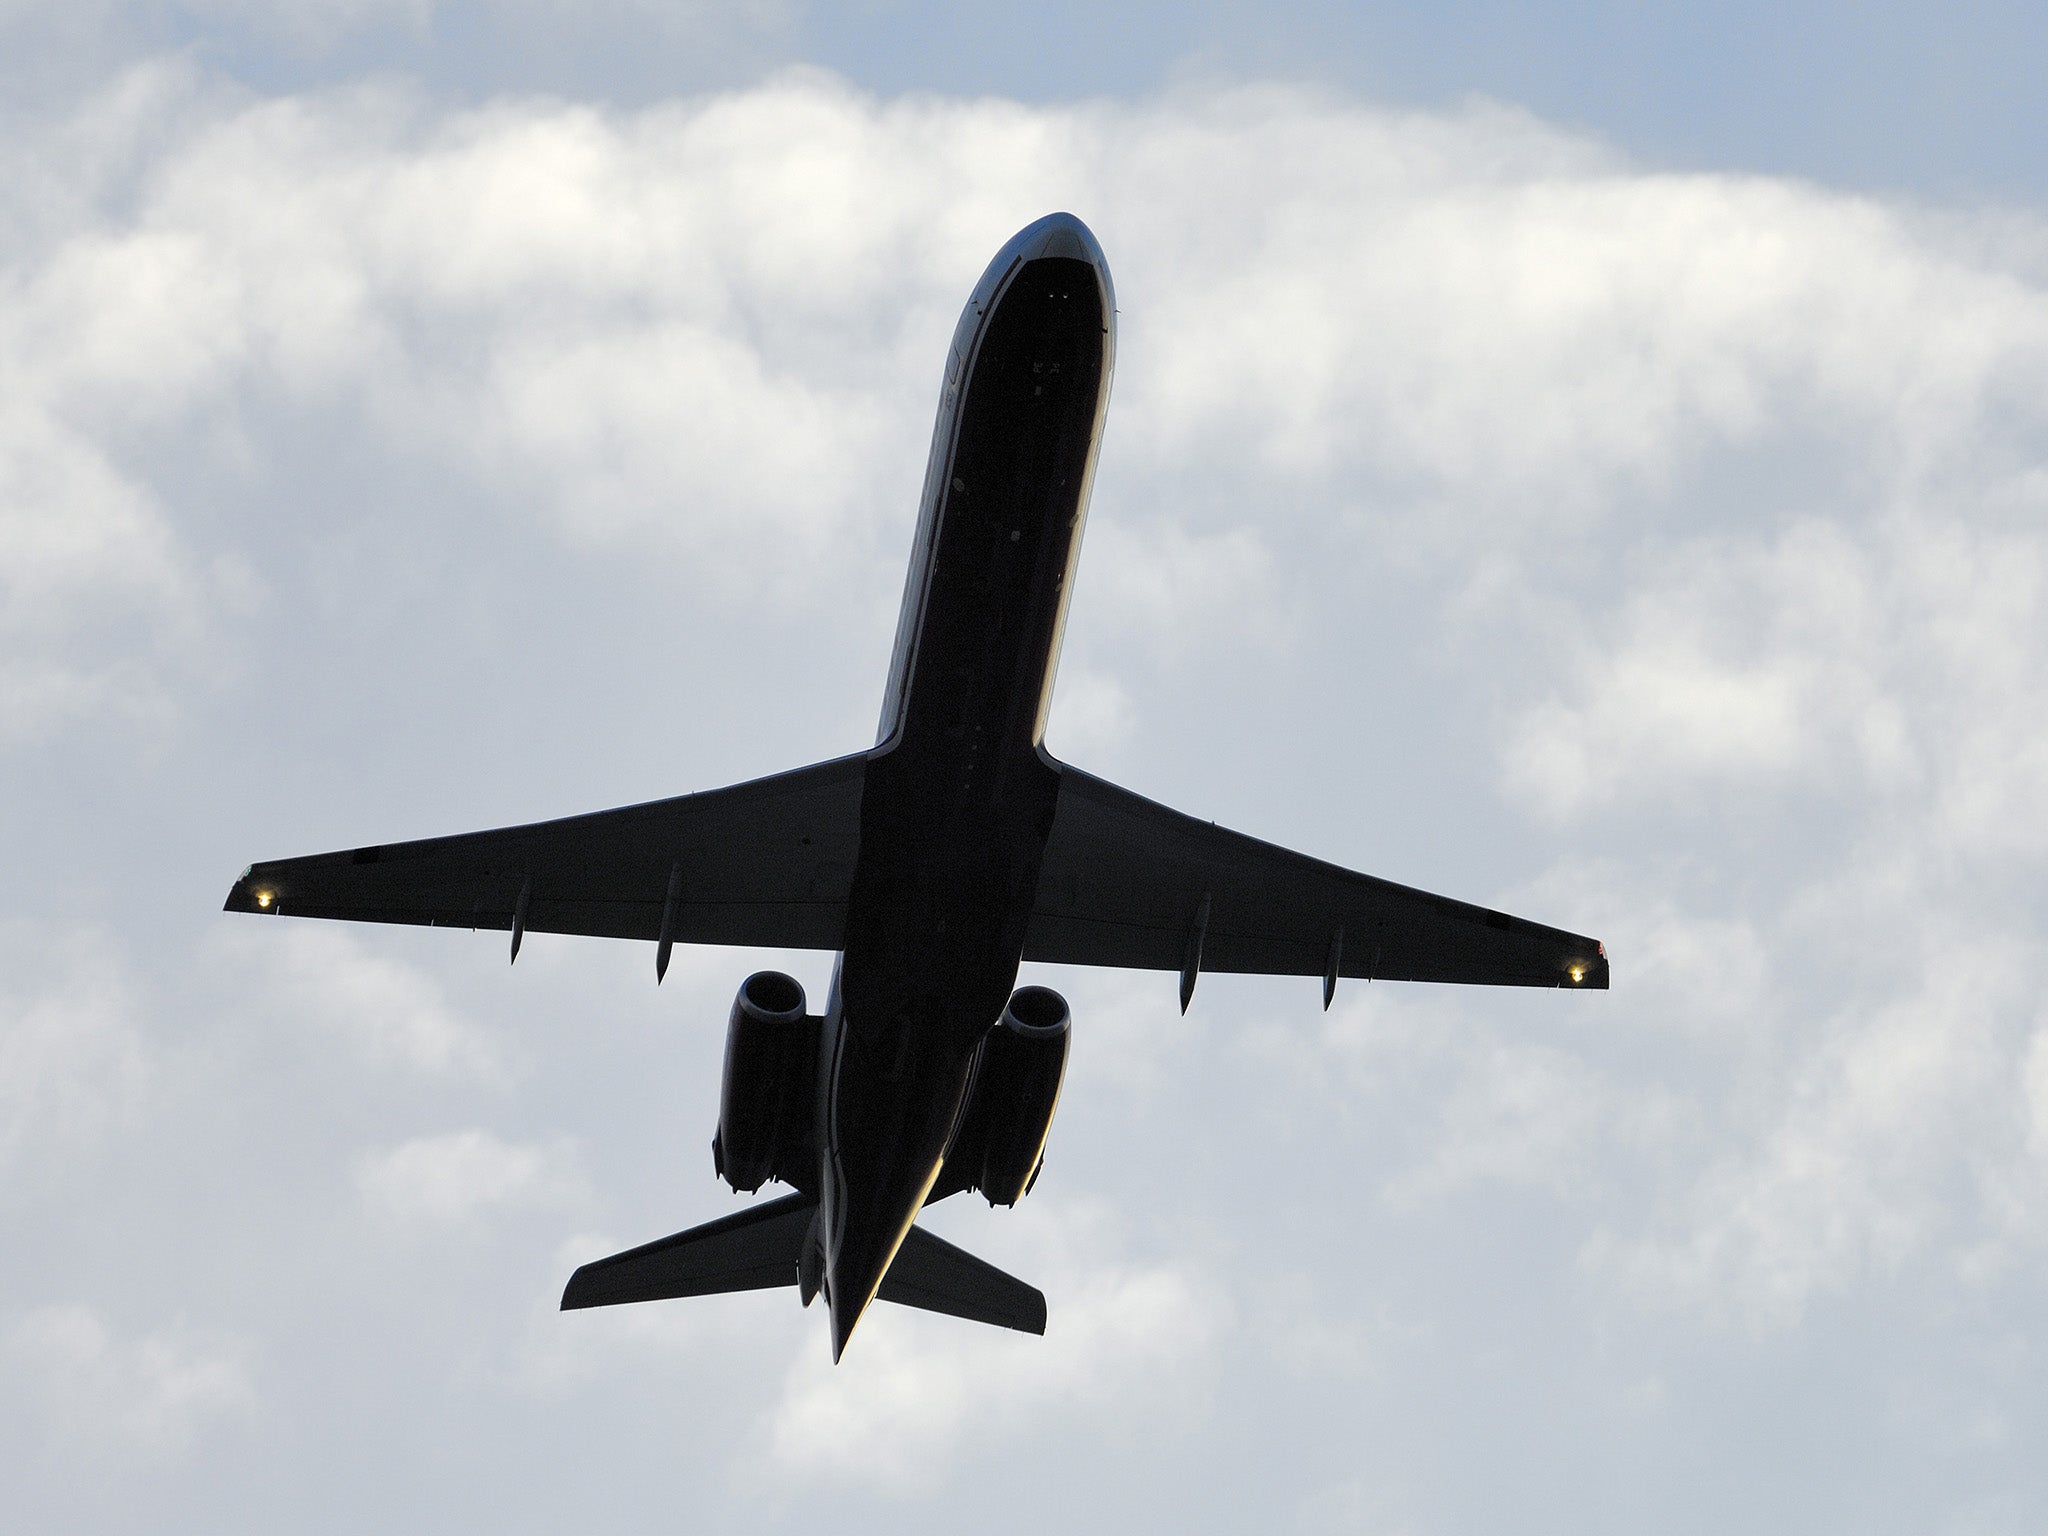 Passenger transport by air climbed 17.9 per cent over the same period.